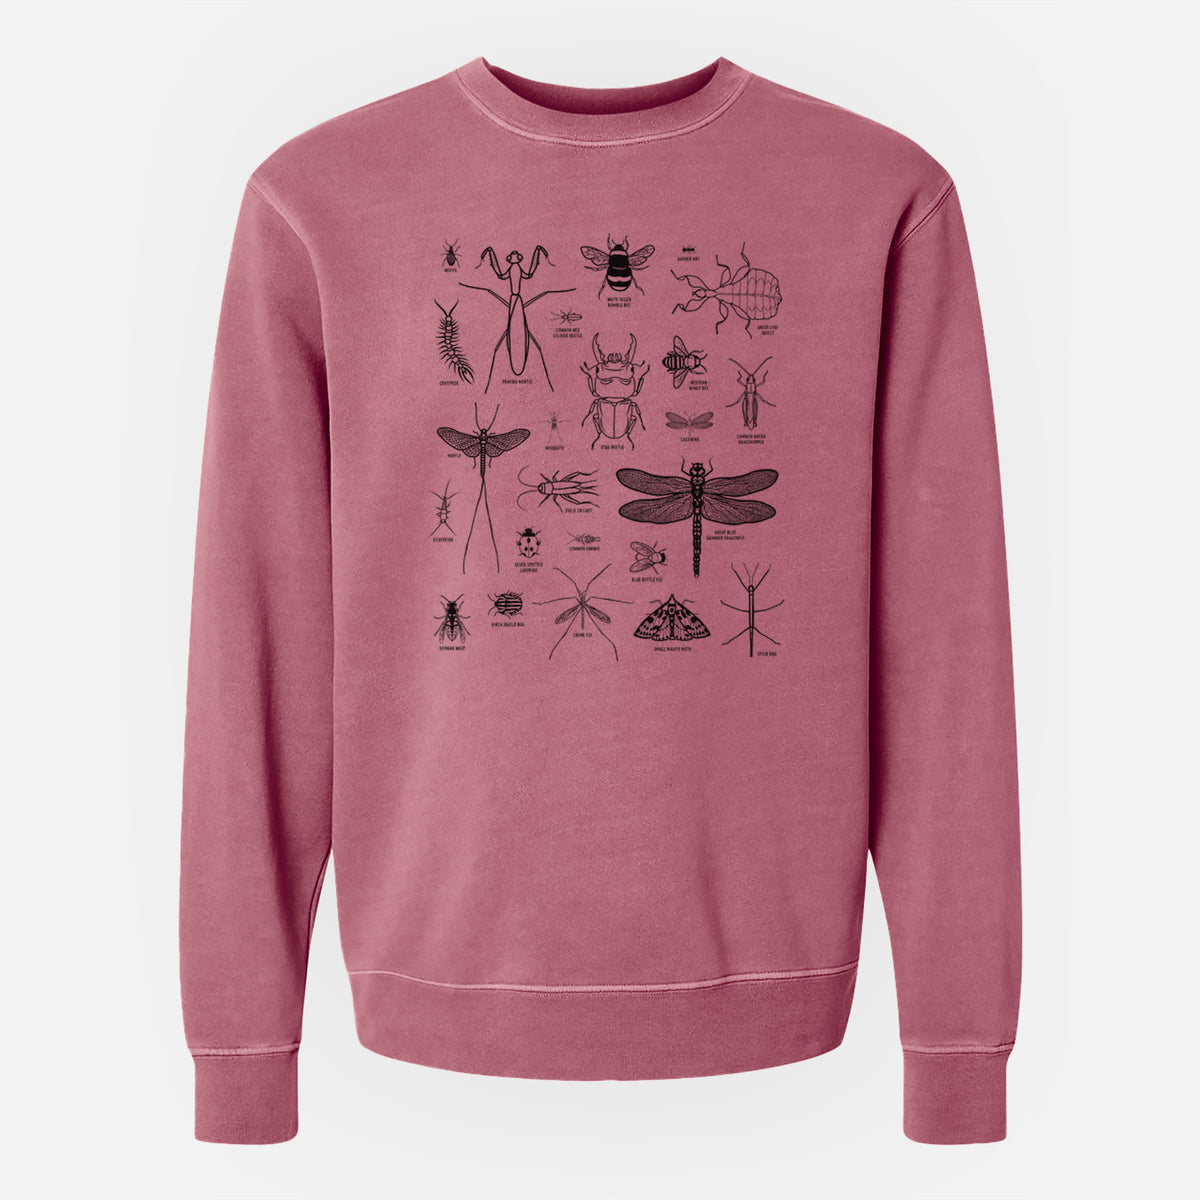 Chart of Arthropods/Insects - Unisex Pigment Dyed Crew Sweatshirt